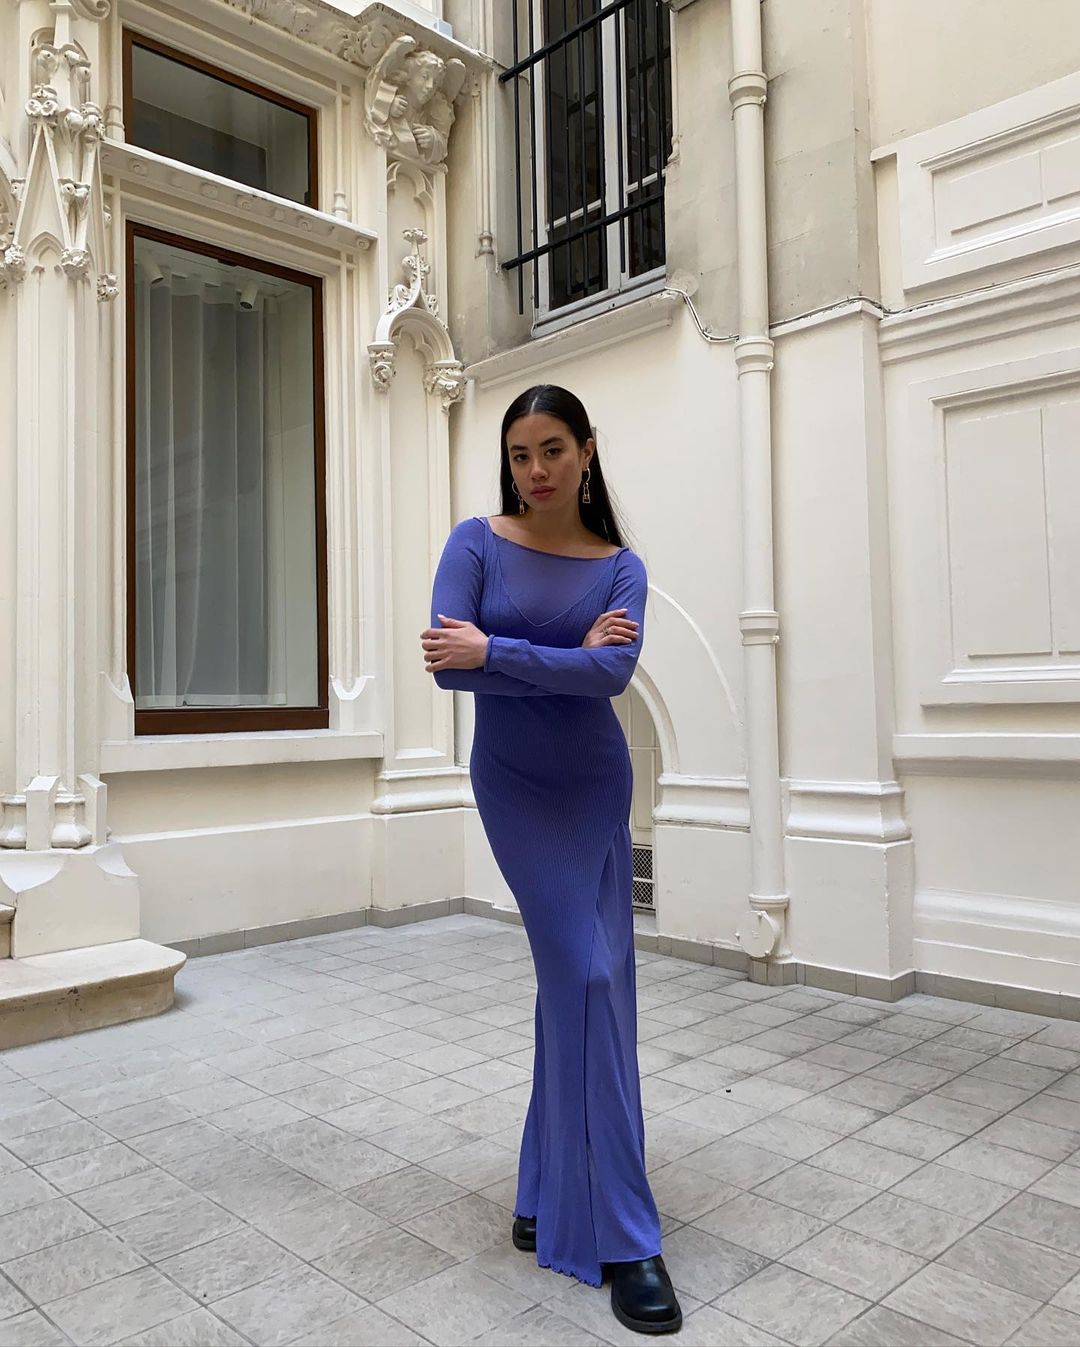 Influencers Wearing Spring Trends: @sasha.mei wears a maxi dress